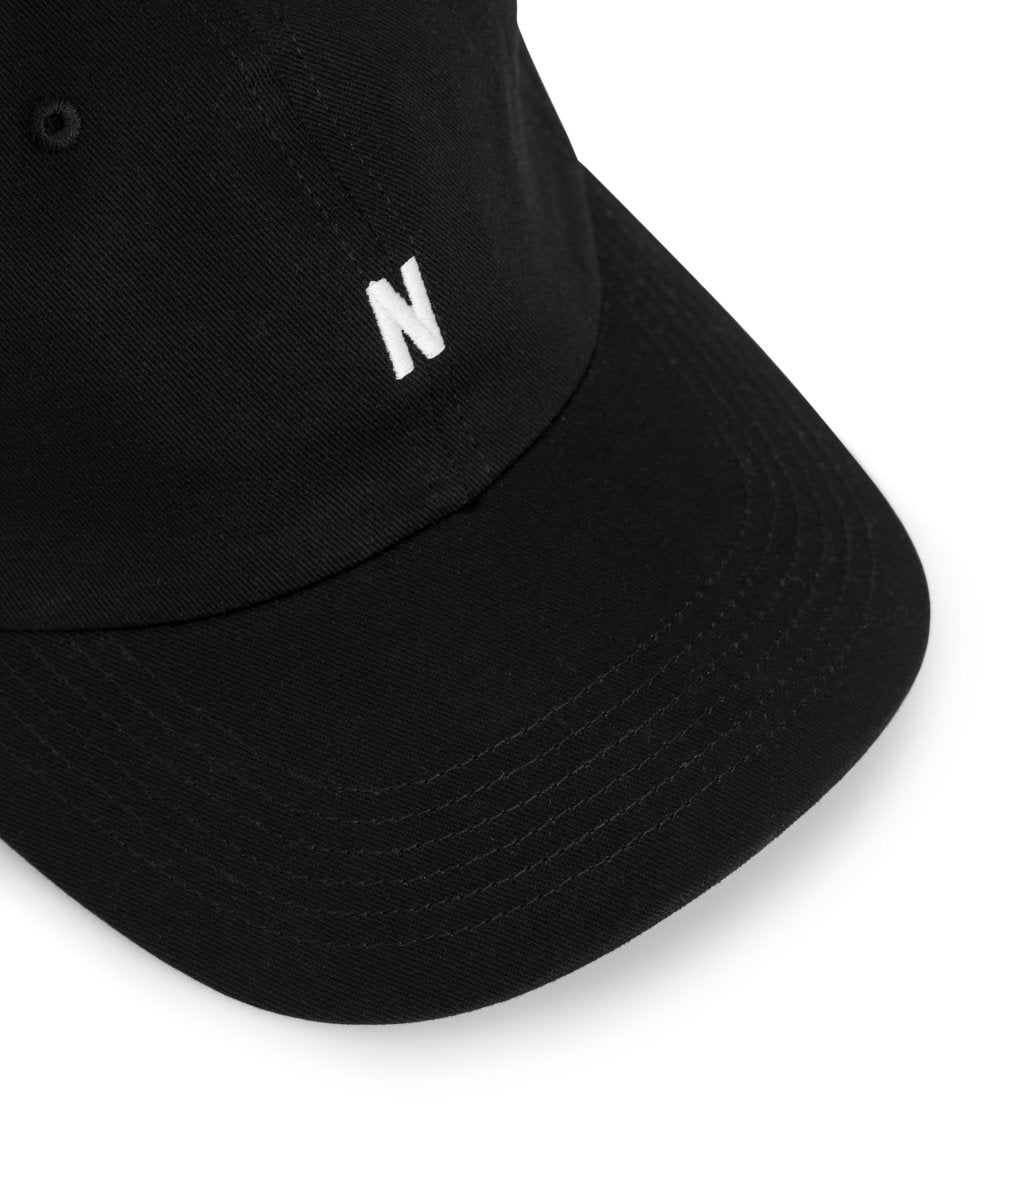 NP Twill Sports Cap 9999 Black - KYOTO - Norse Projects